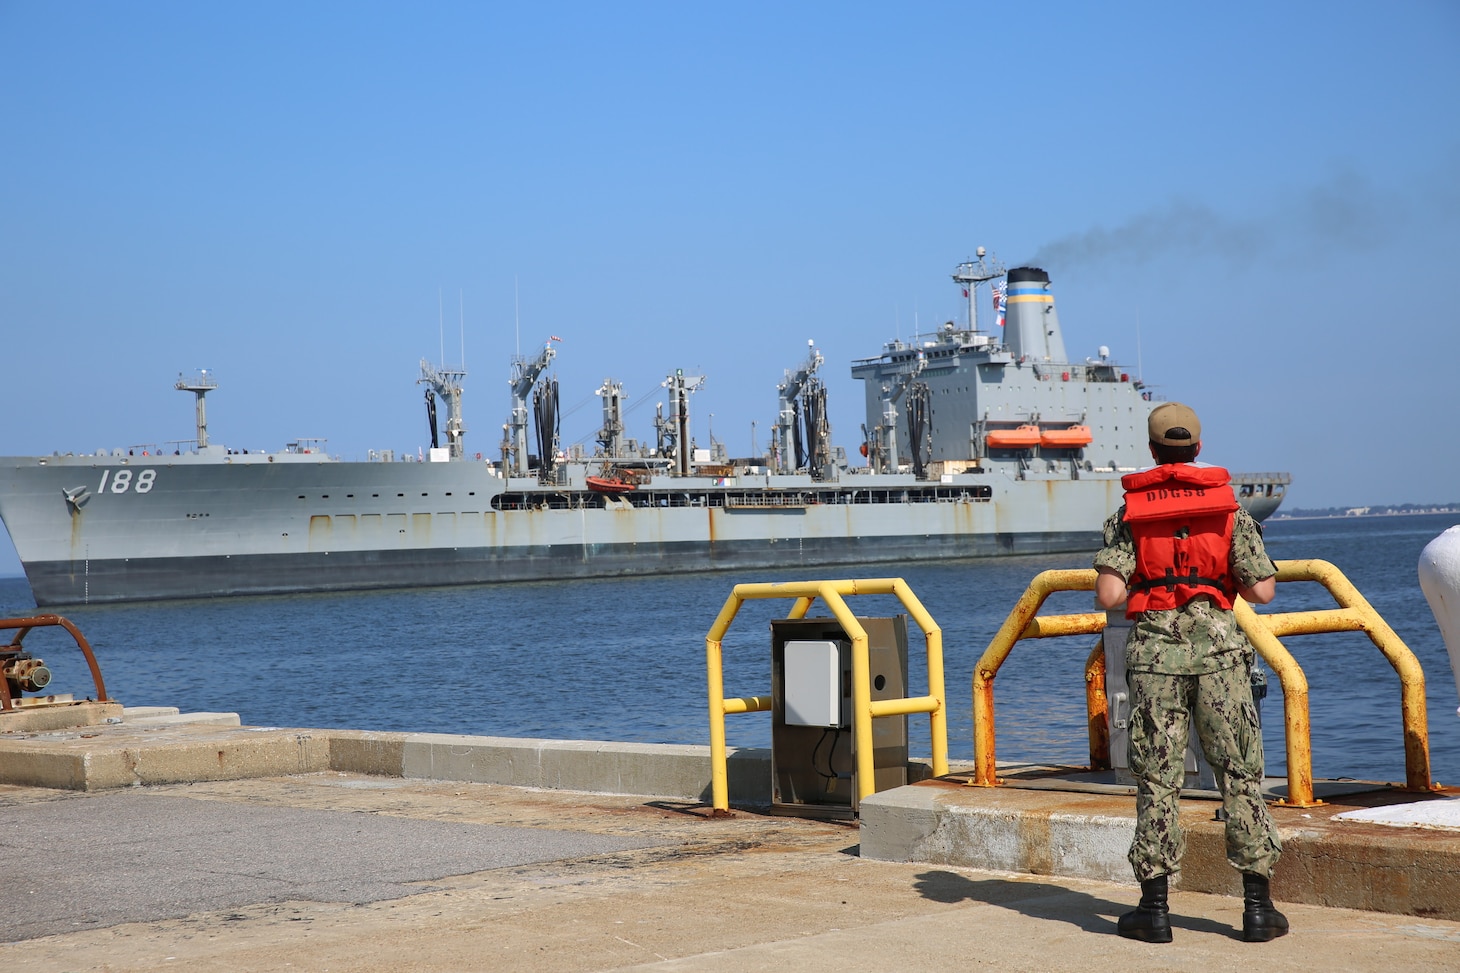 USNS Joshua Humphreys (T-AO 188) returned to Naval Station Norfolk, after completing a five-month deployment in the U.S. Fifth Fleet, responsible for Naval Forces in the Persian Gulf, Red Sea, Arabian Sea, and parts of the Indian Ocean, August 11.